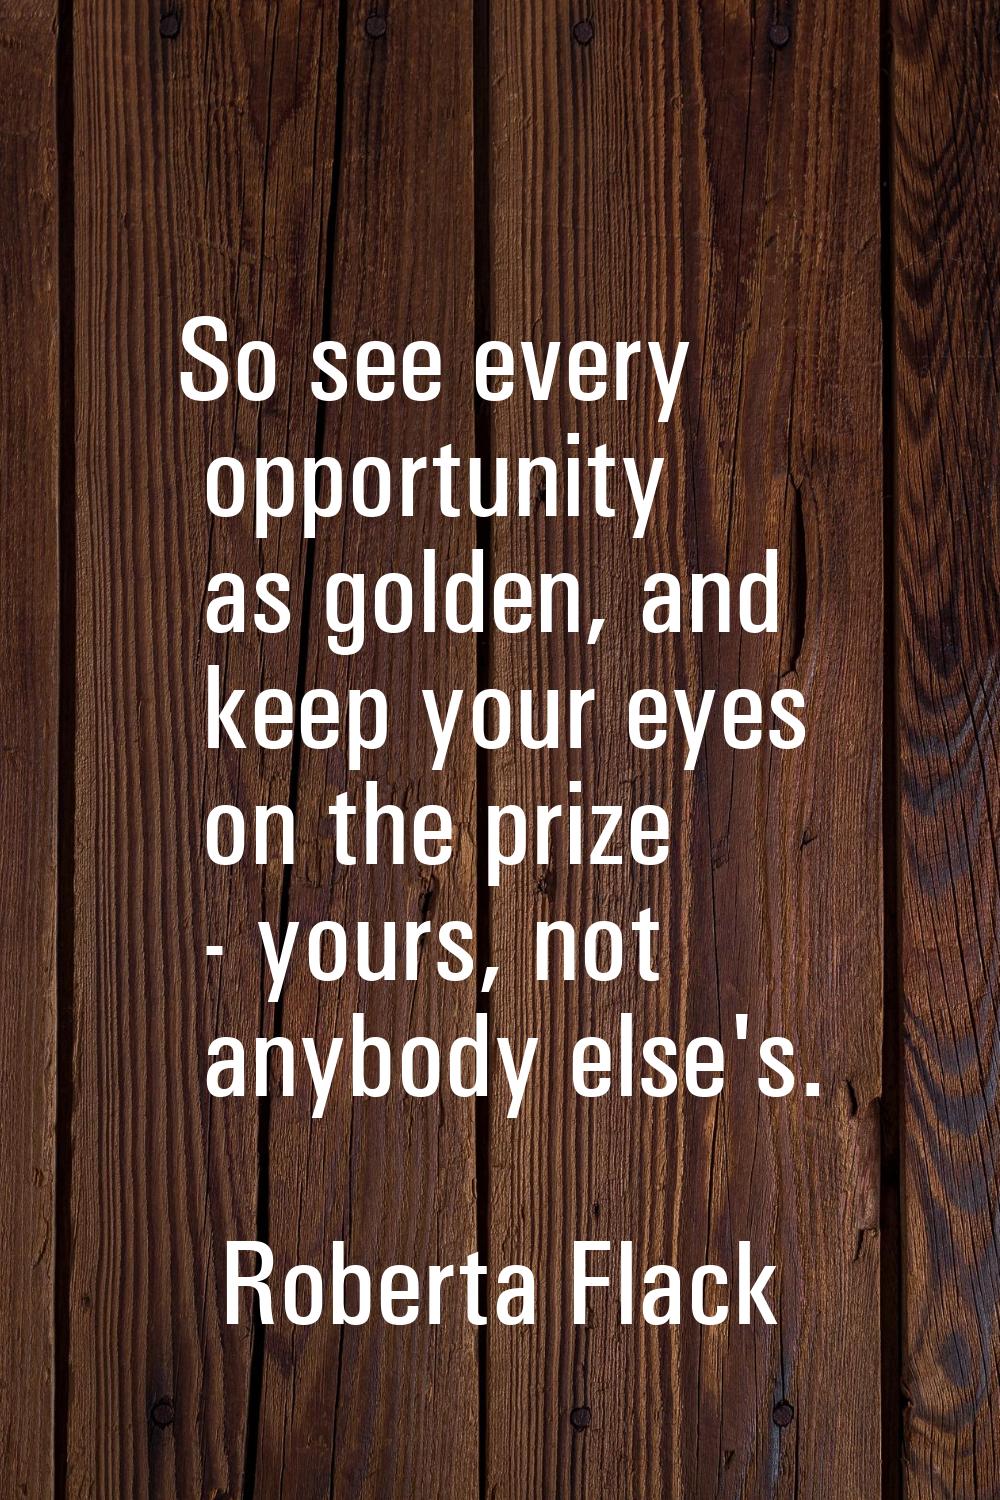 So see every opportunity as golden, and keep your eyes on the prize - yours, not anybody else's.